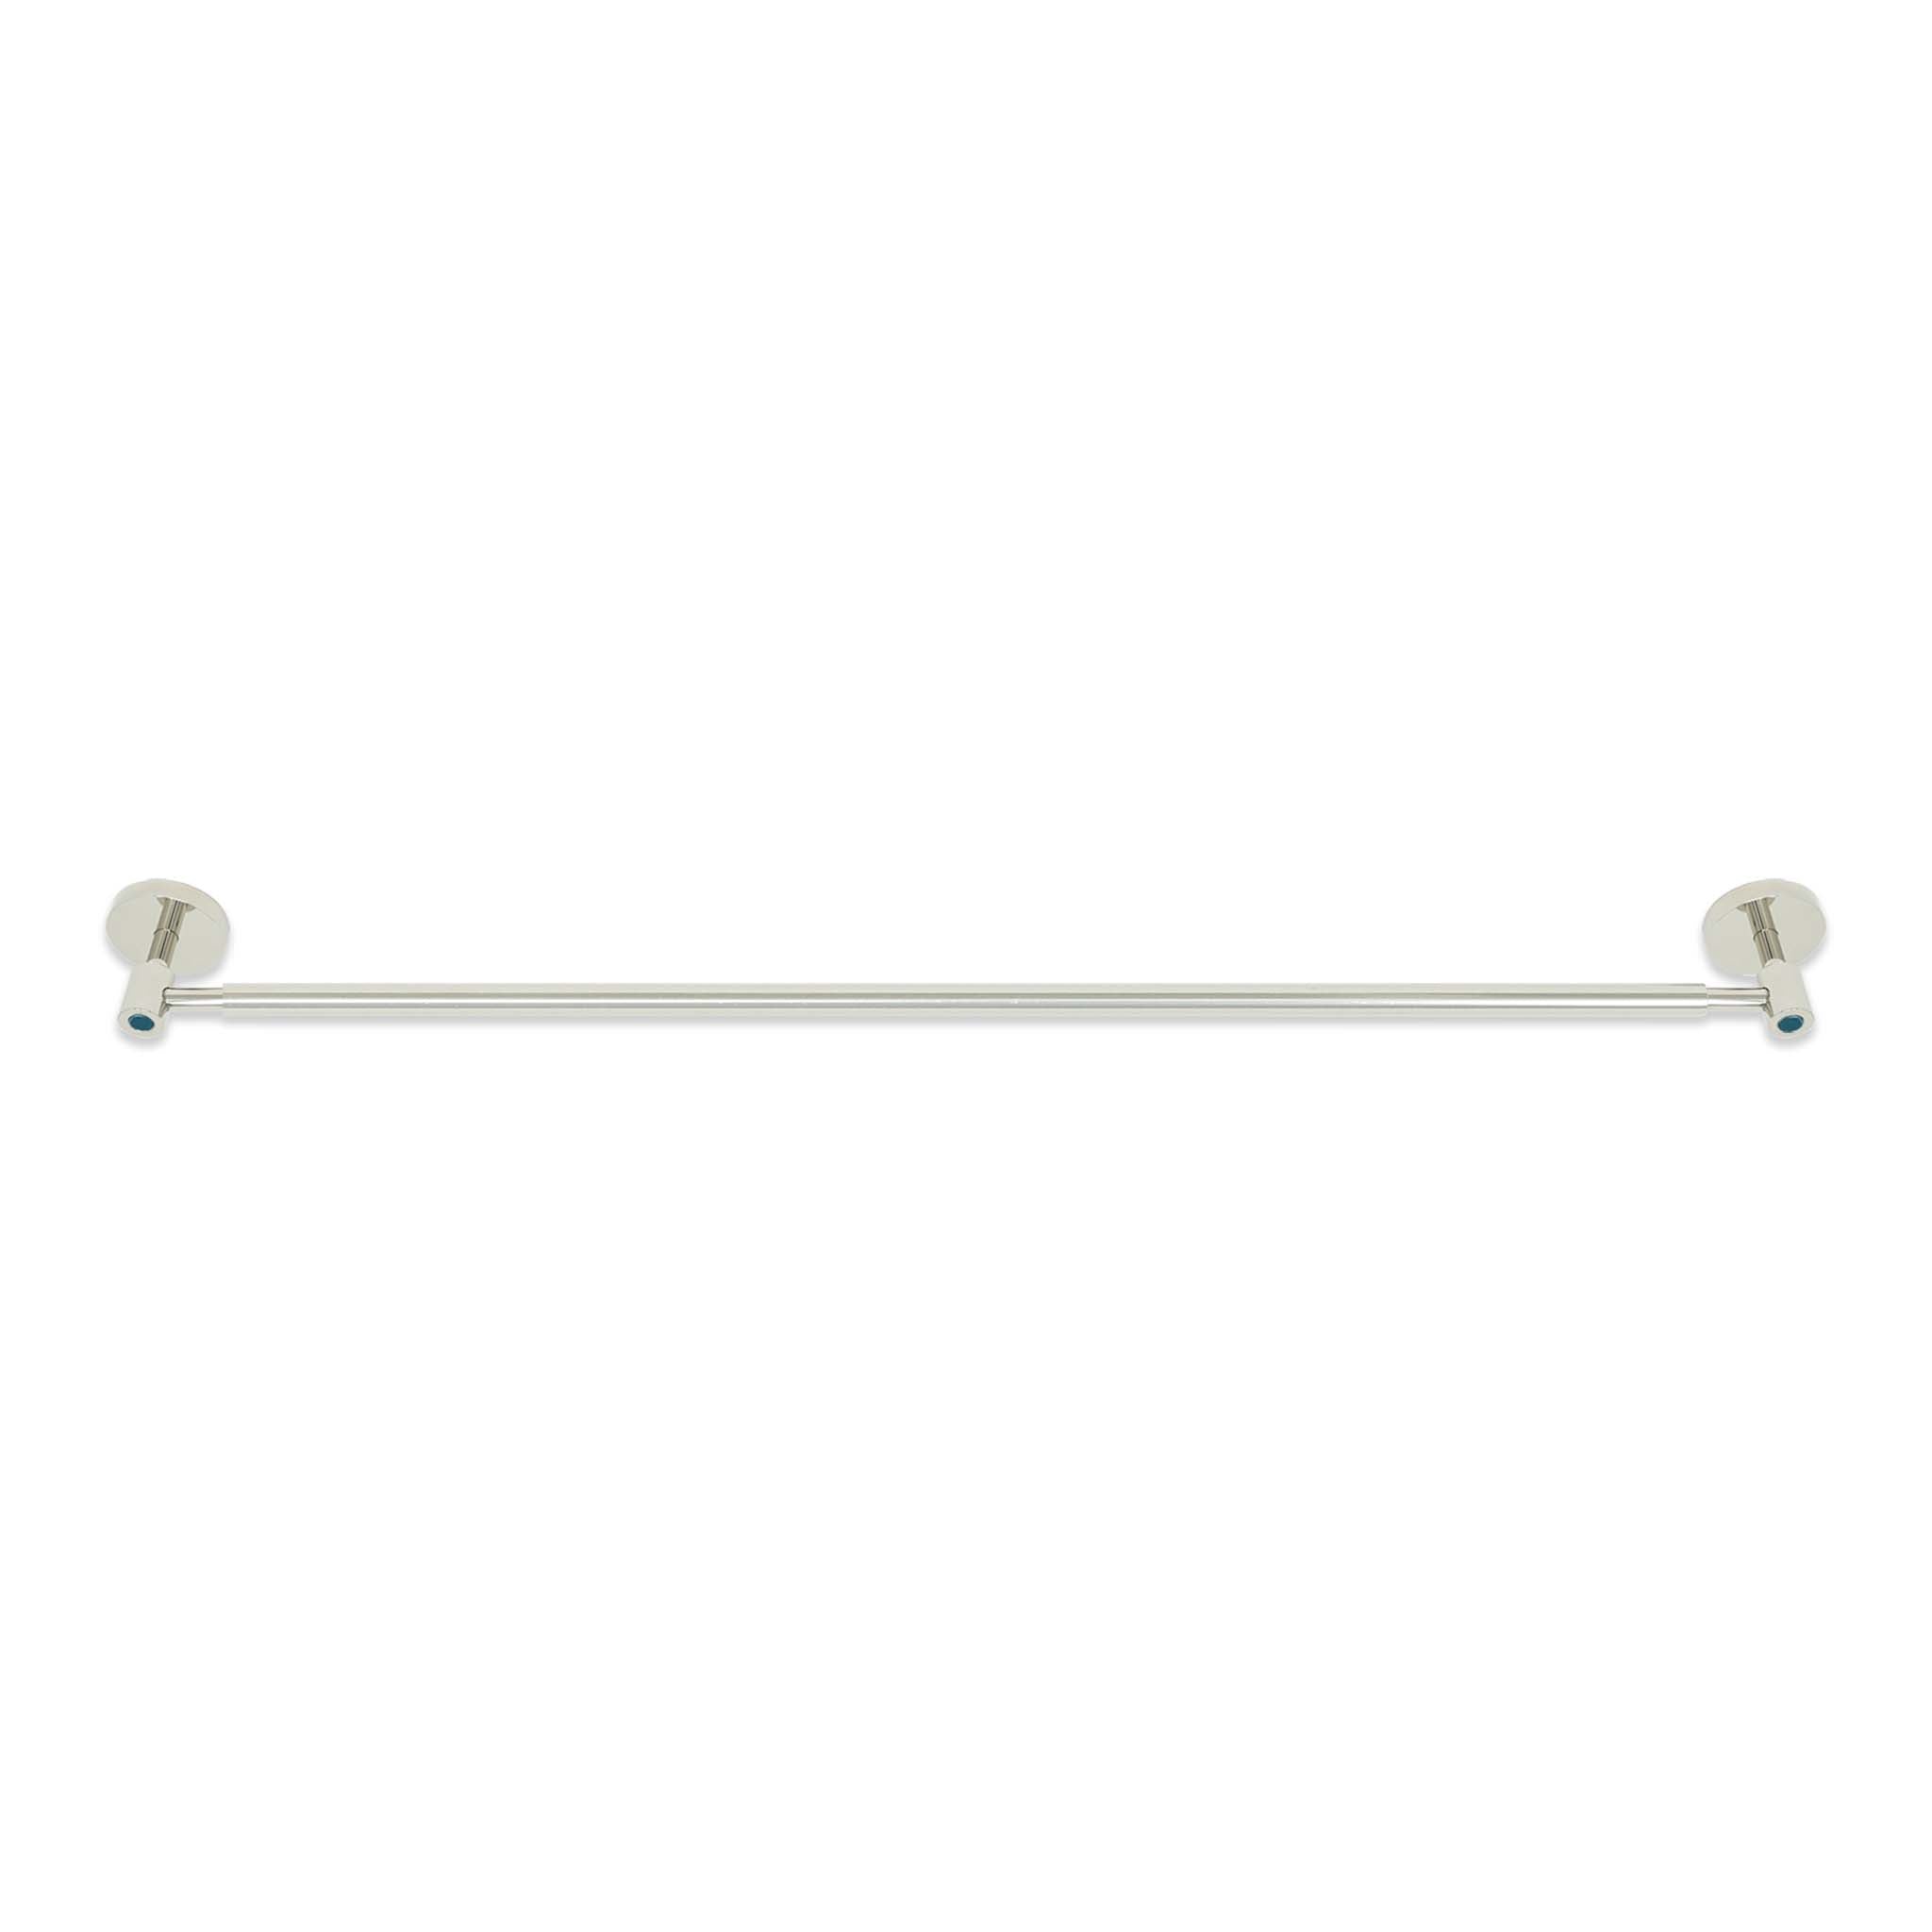 Nickel and slate blue color Head towel bar 24" Dutton Brown hardware